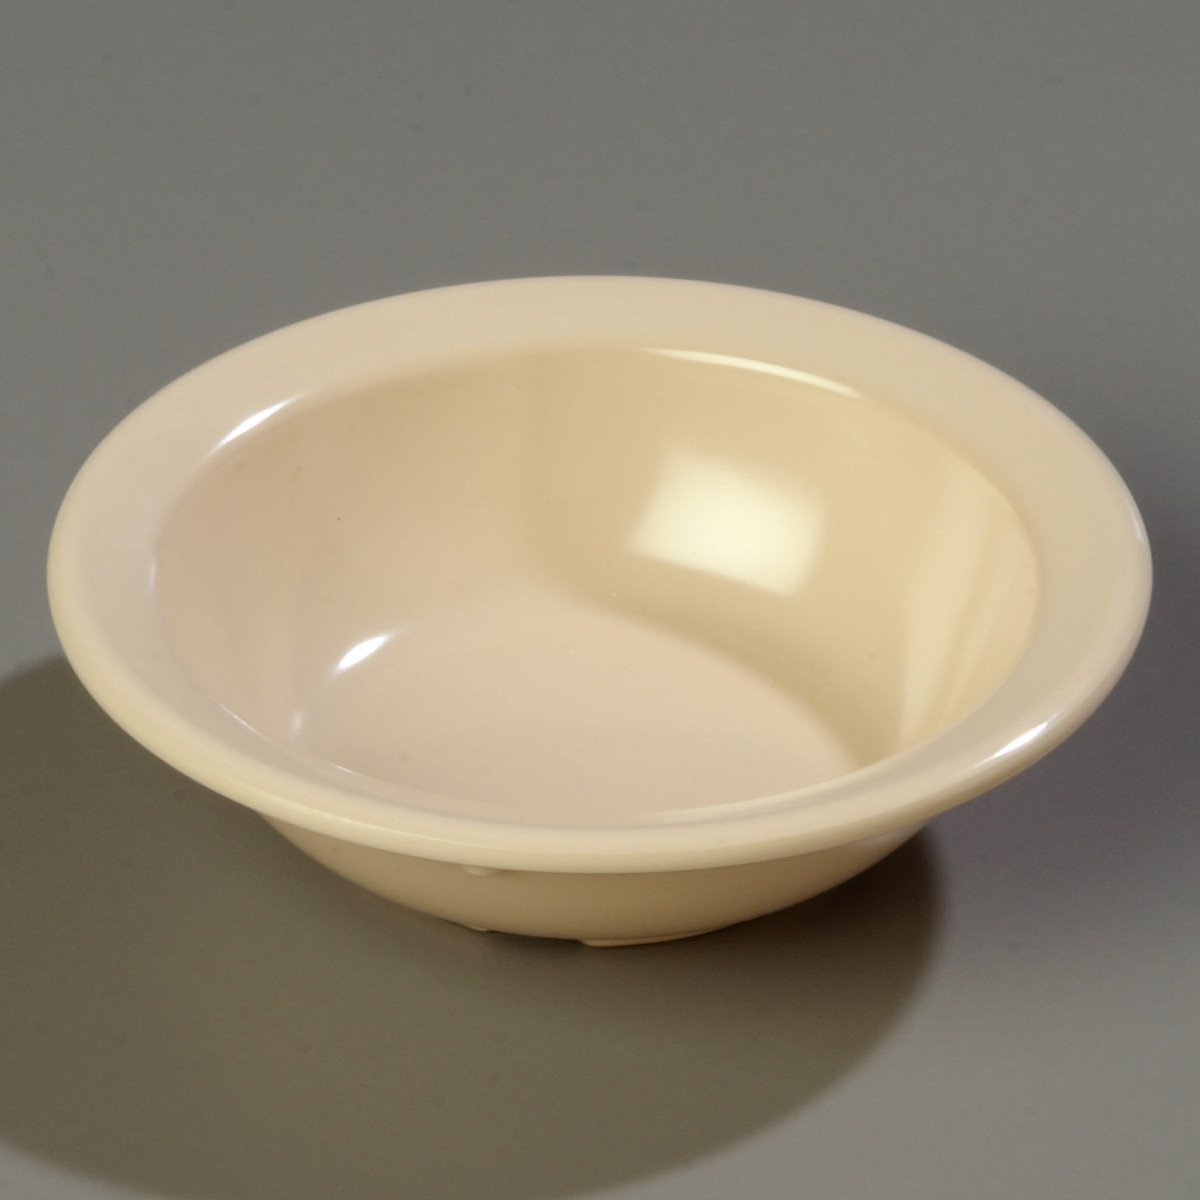 Carlisle FoodService Products Dallas Ware Reusable Plastic Bowl Fruit Bowl for Buffets, Home, and Restaurants, Melamine, 4.75 Ounces, Tan